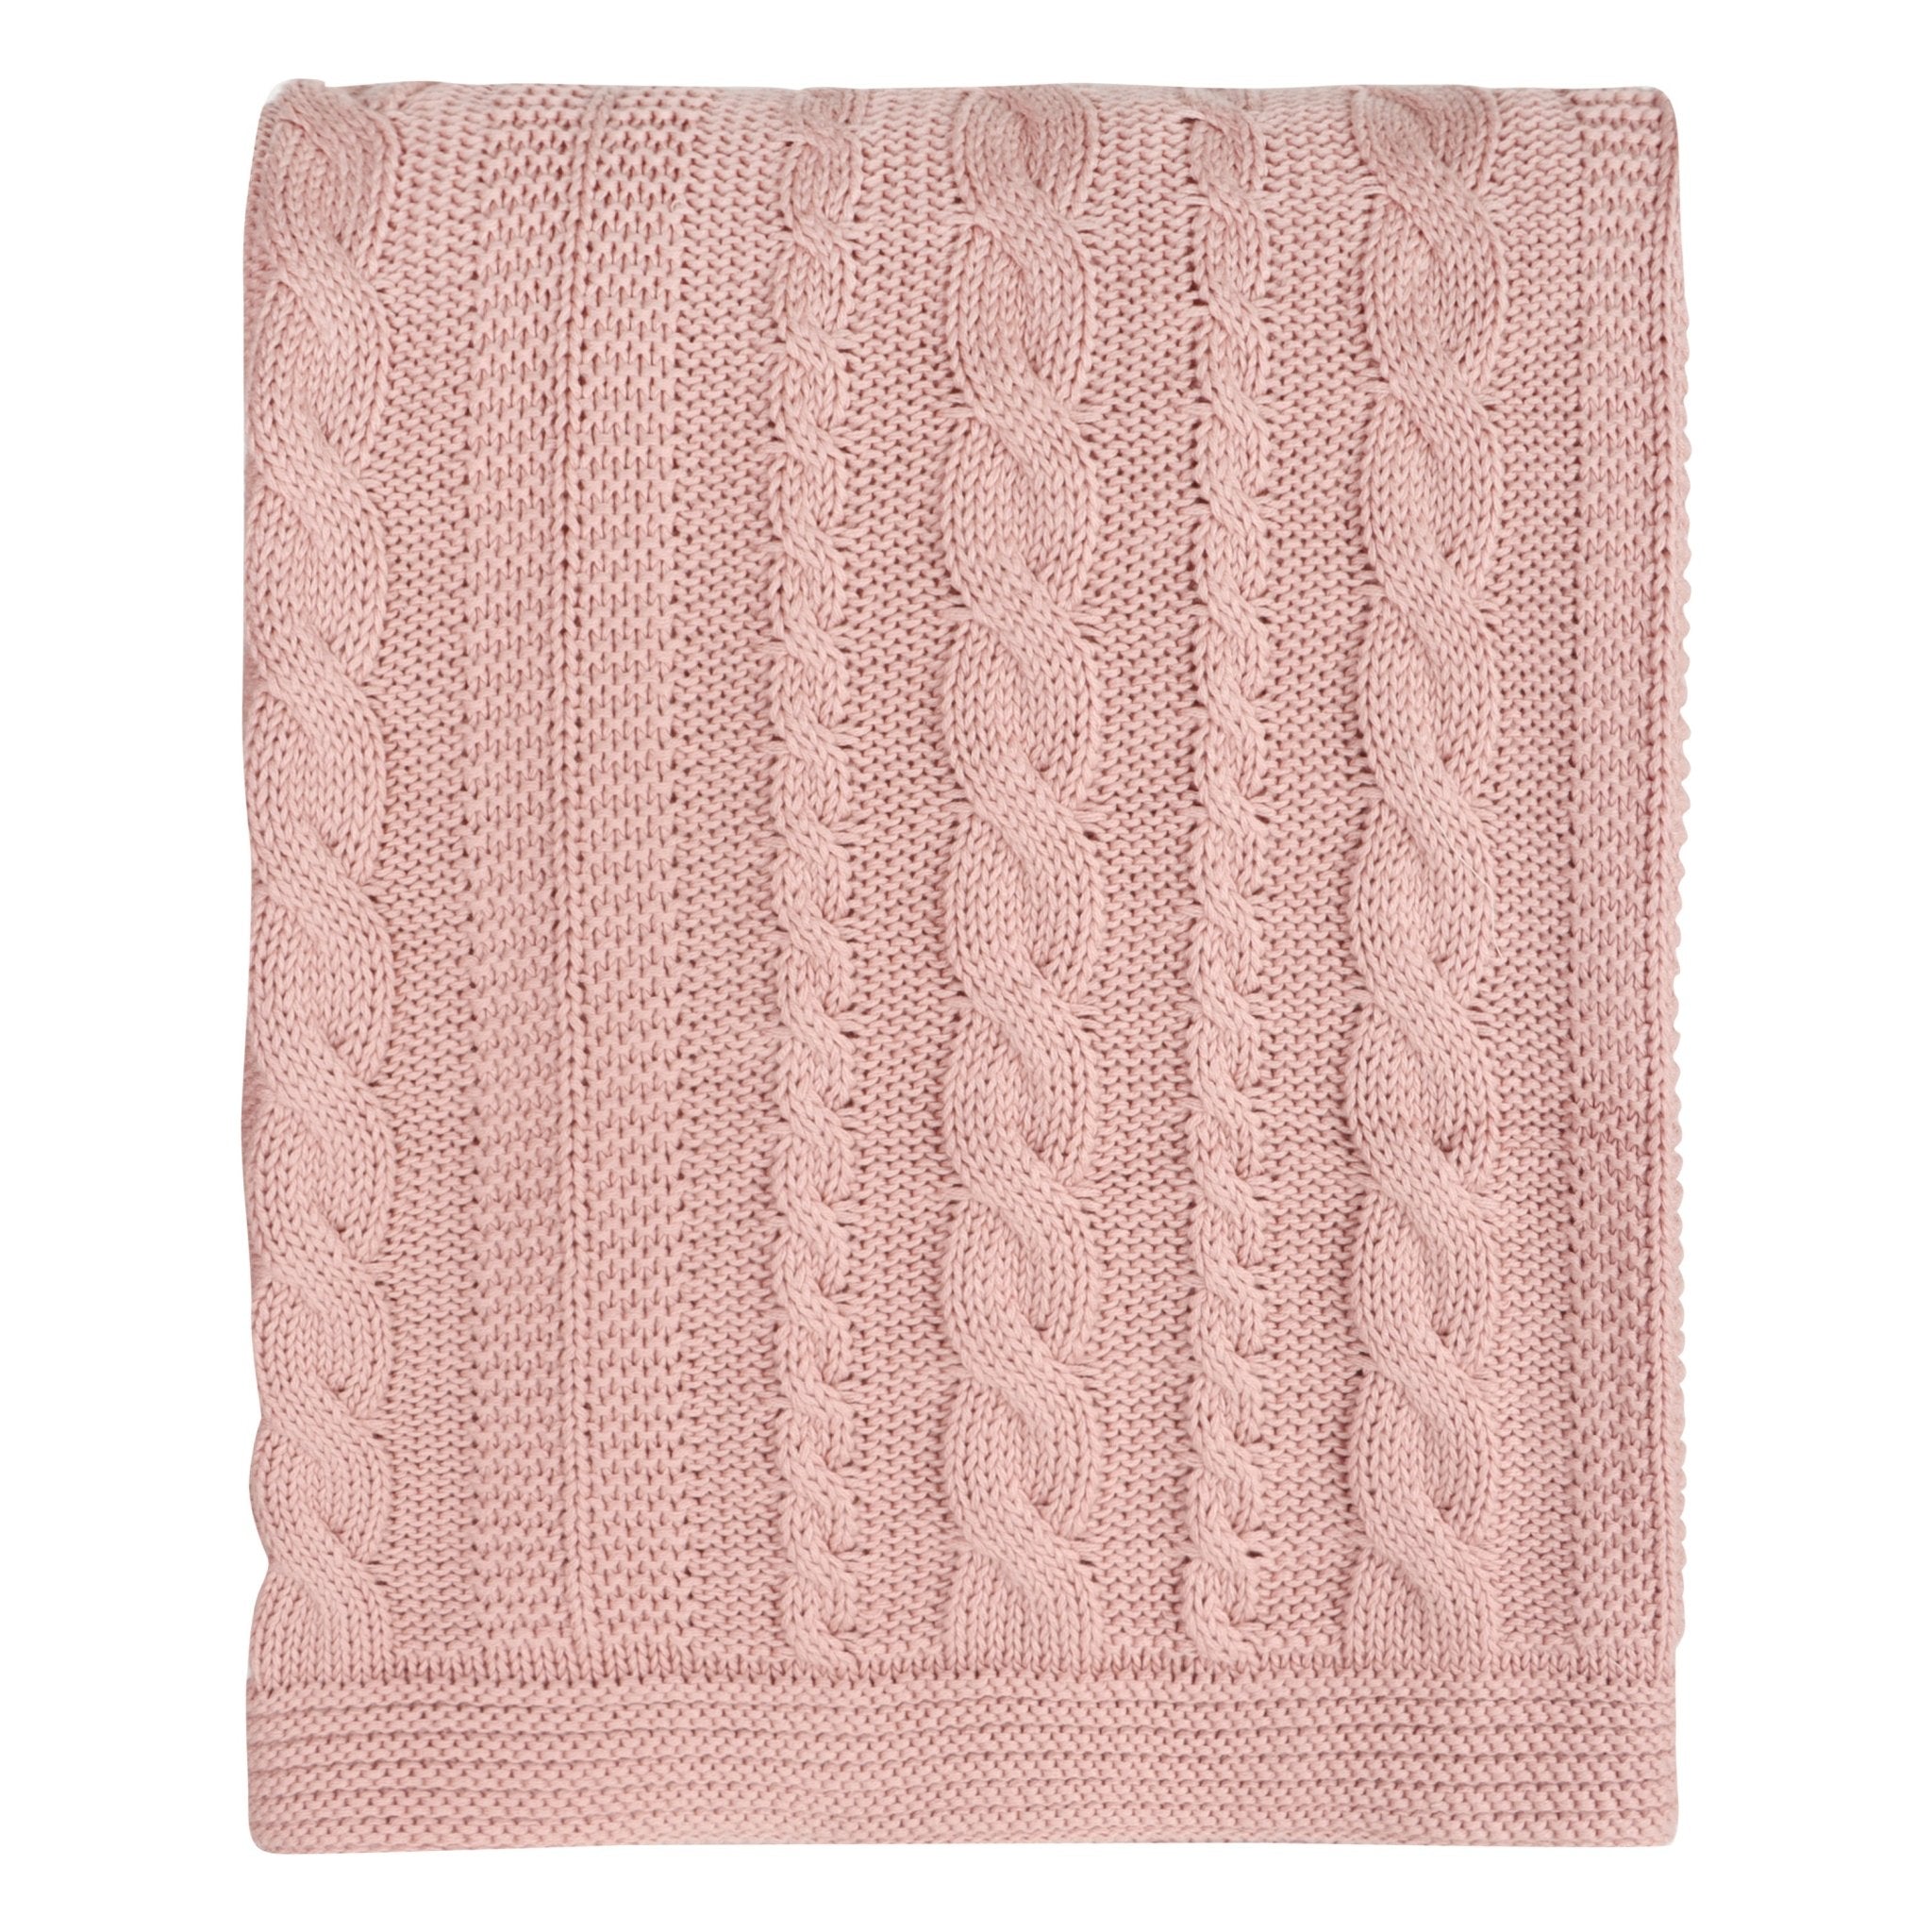 Organic Cotton Cable Knit Throw (Cameo Pink) - DelaraHome